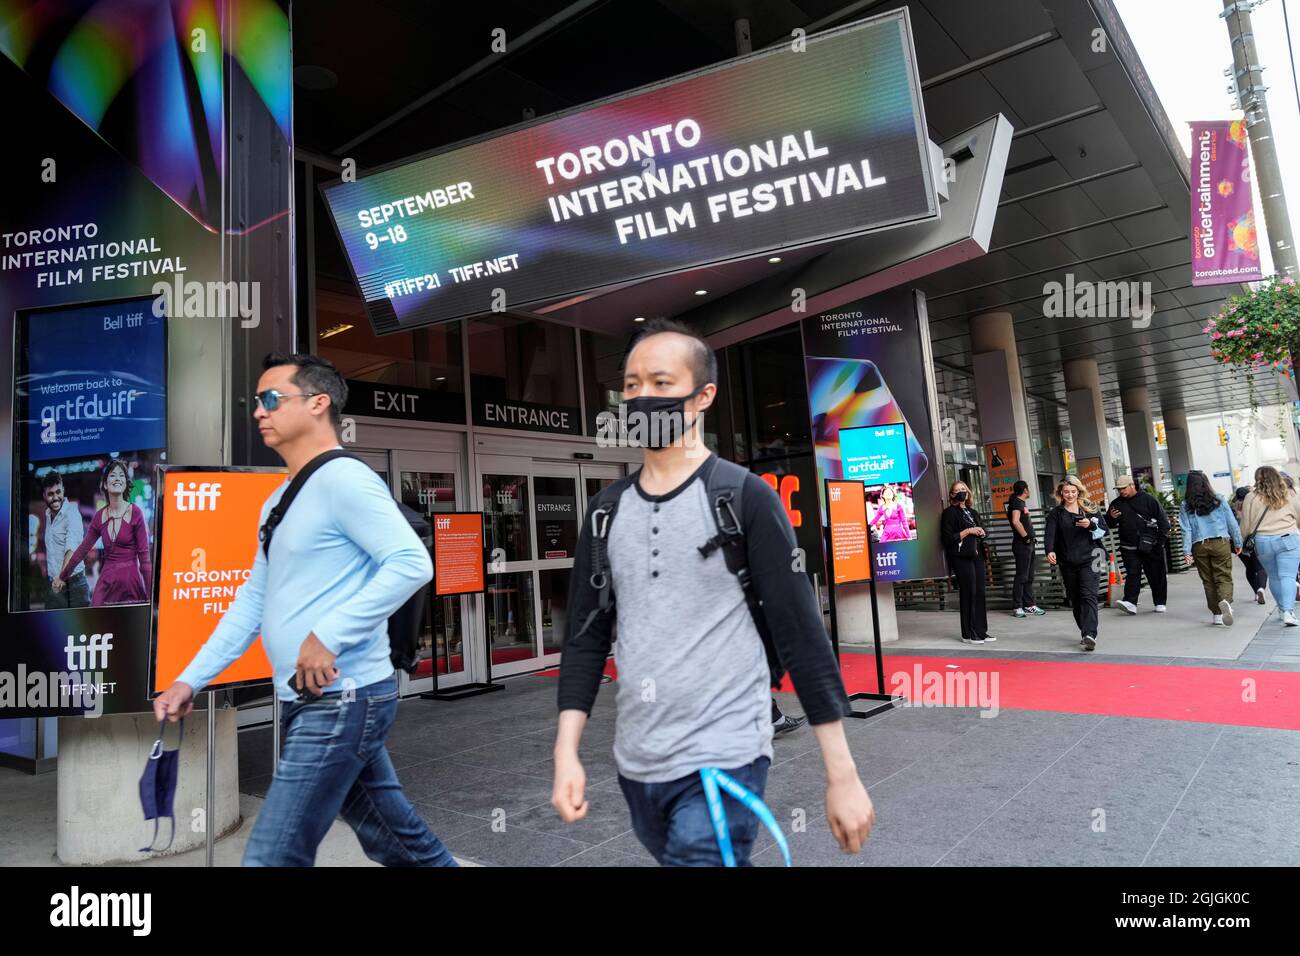 People walk outside the TIFF Bell Lightbox building, headquarters of the Toronto International Film Festival (TIFF), in Toronto, Canada, September 9, 2021. REUTERS/Mark Blinch Stock Photo